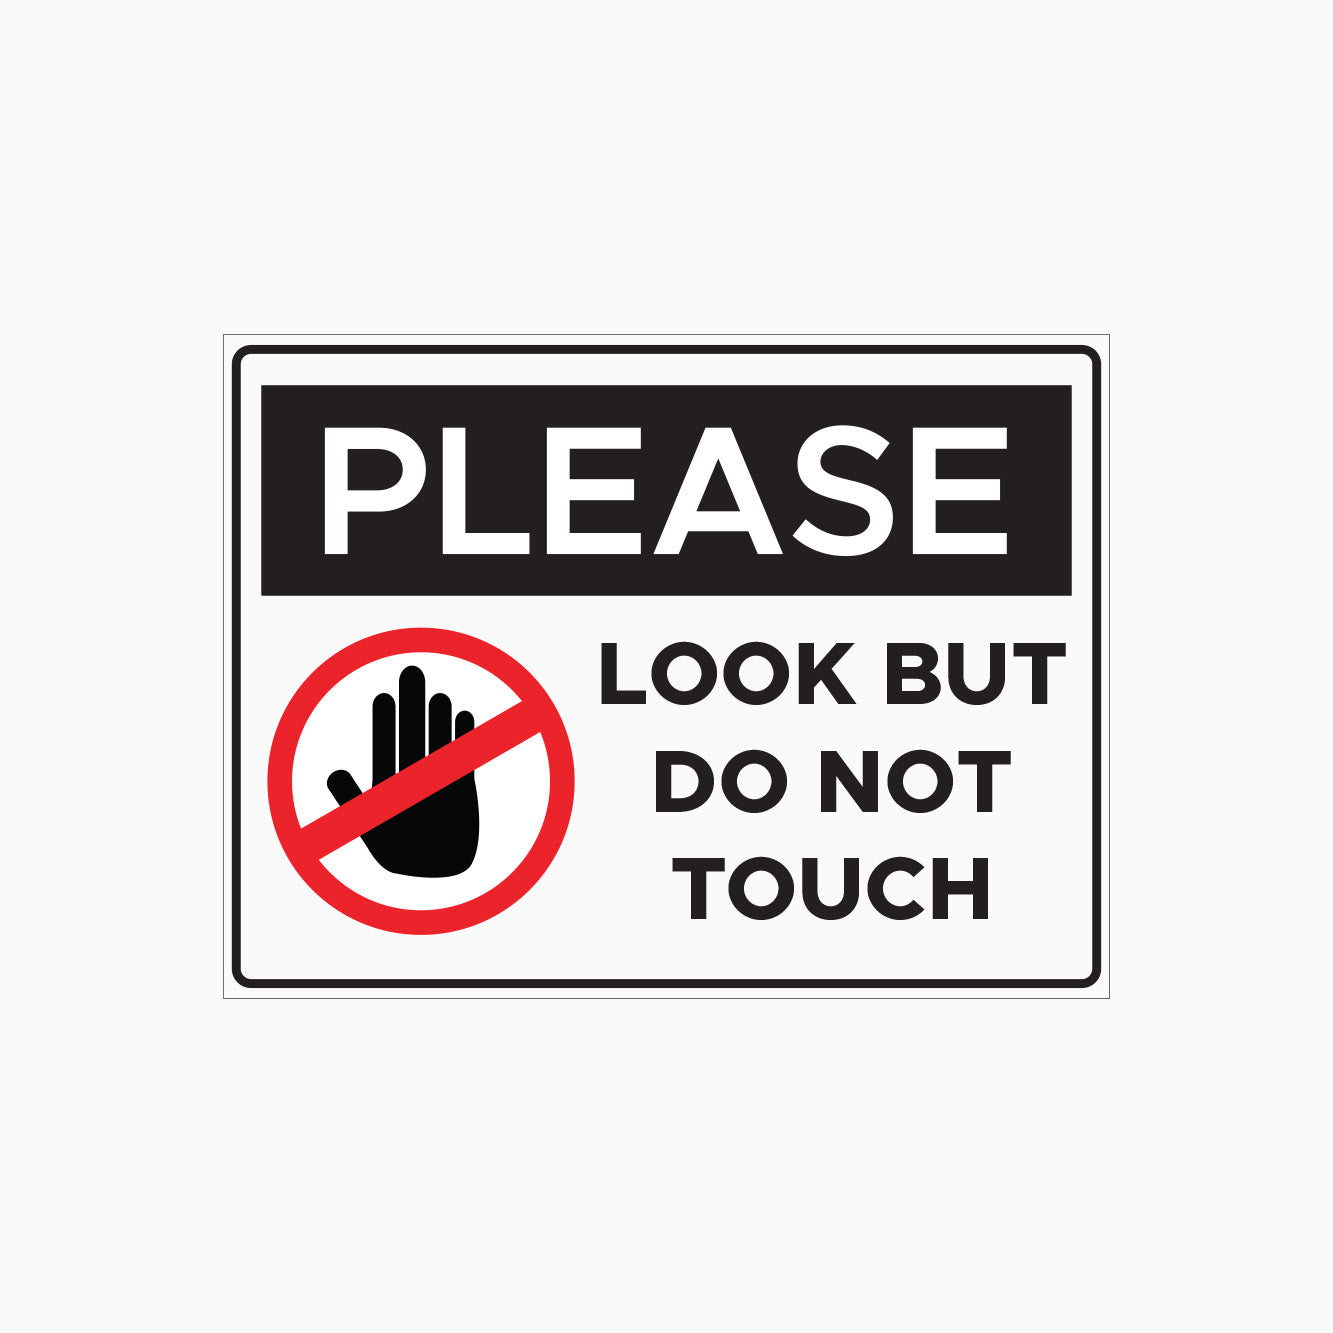 PLEASE LOOK BUT DO NOT TOUCH SIGN – Get signs